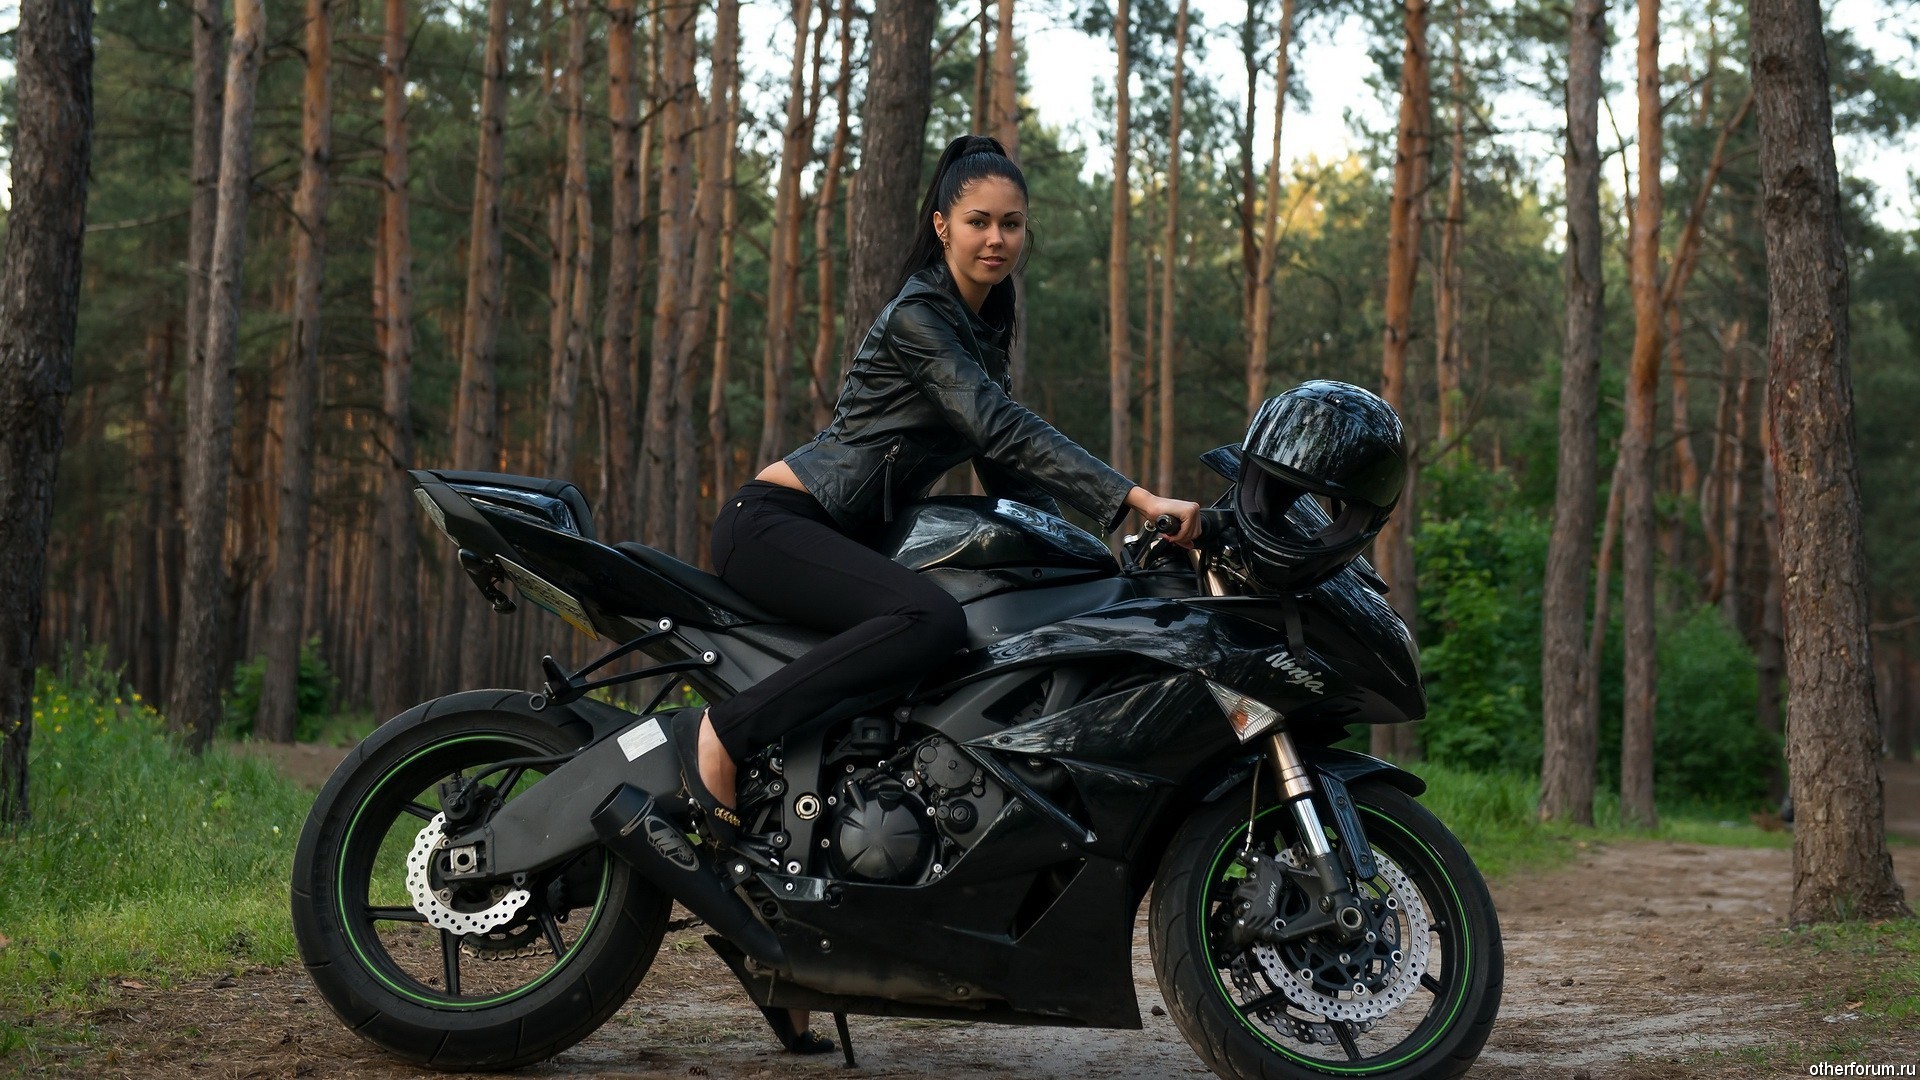 1920x1080 Women and Motorcycles Wallpaper.  Motocycles___Motorcycles_and_girls_Women_Kawasaki_Ninja_motorcycle .